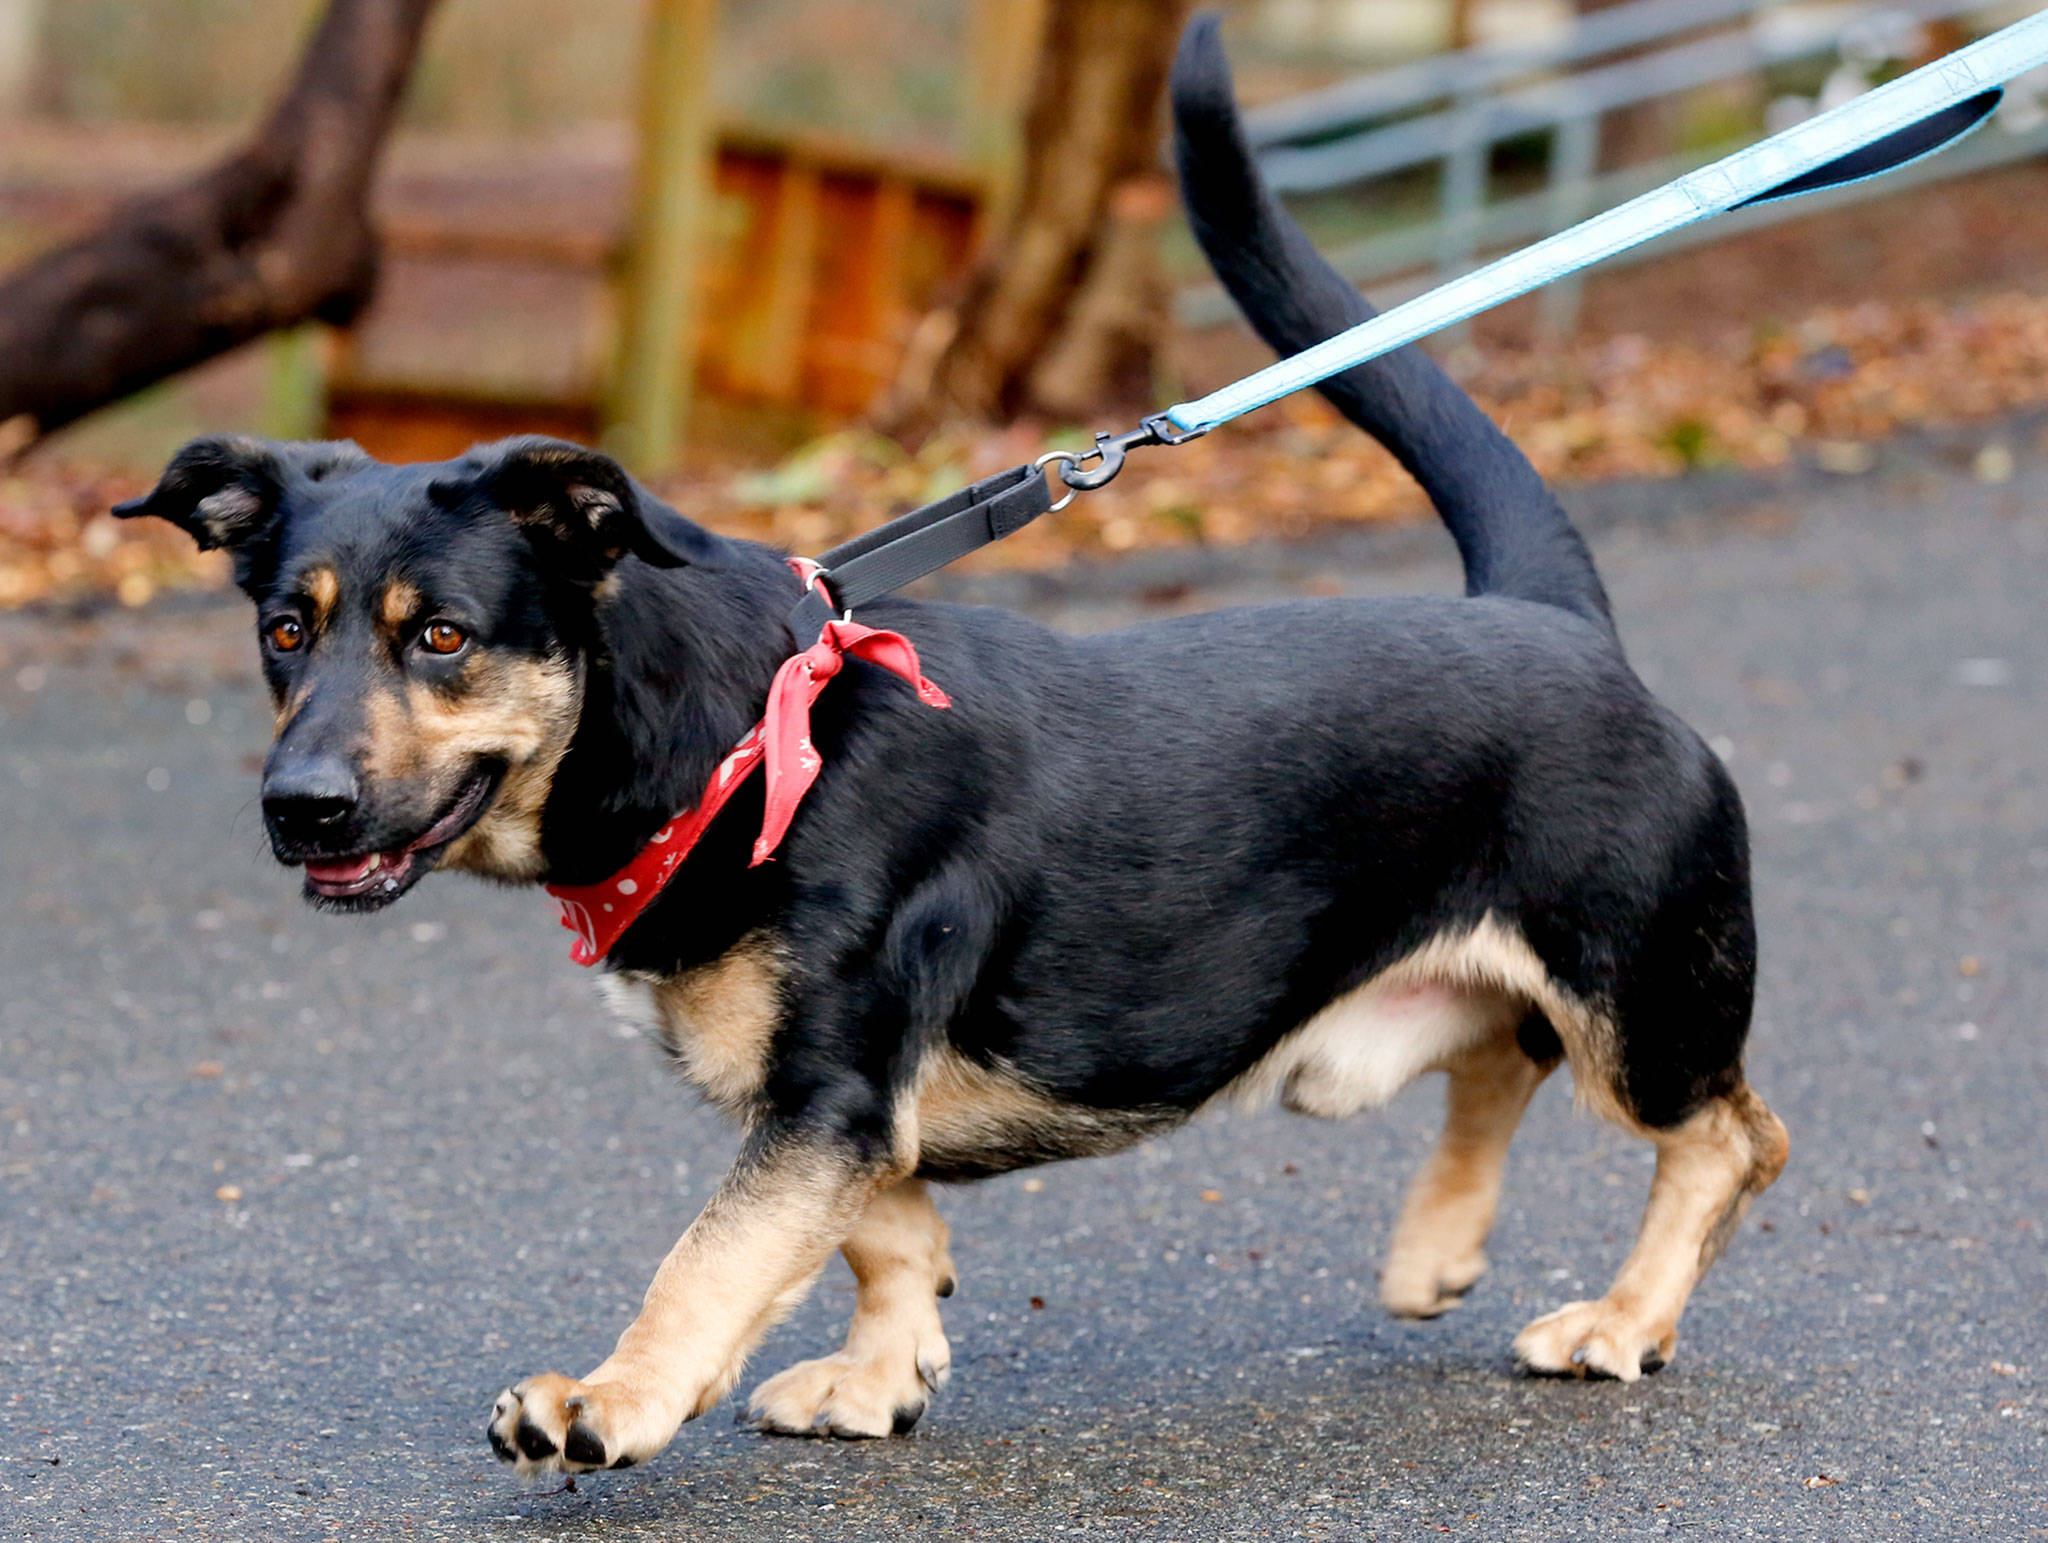 George, a young shepherd mix with short legs, is available for adoption at PAWS in Lynnwood. (Kevin Clark/The Herald)